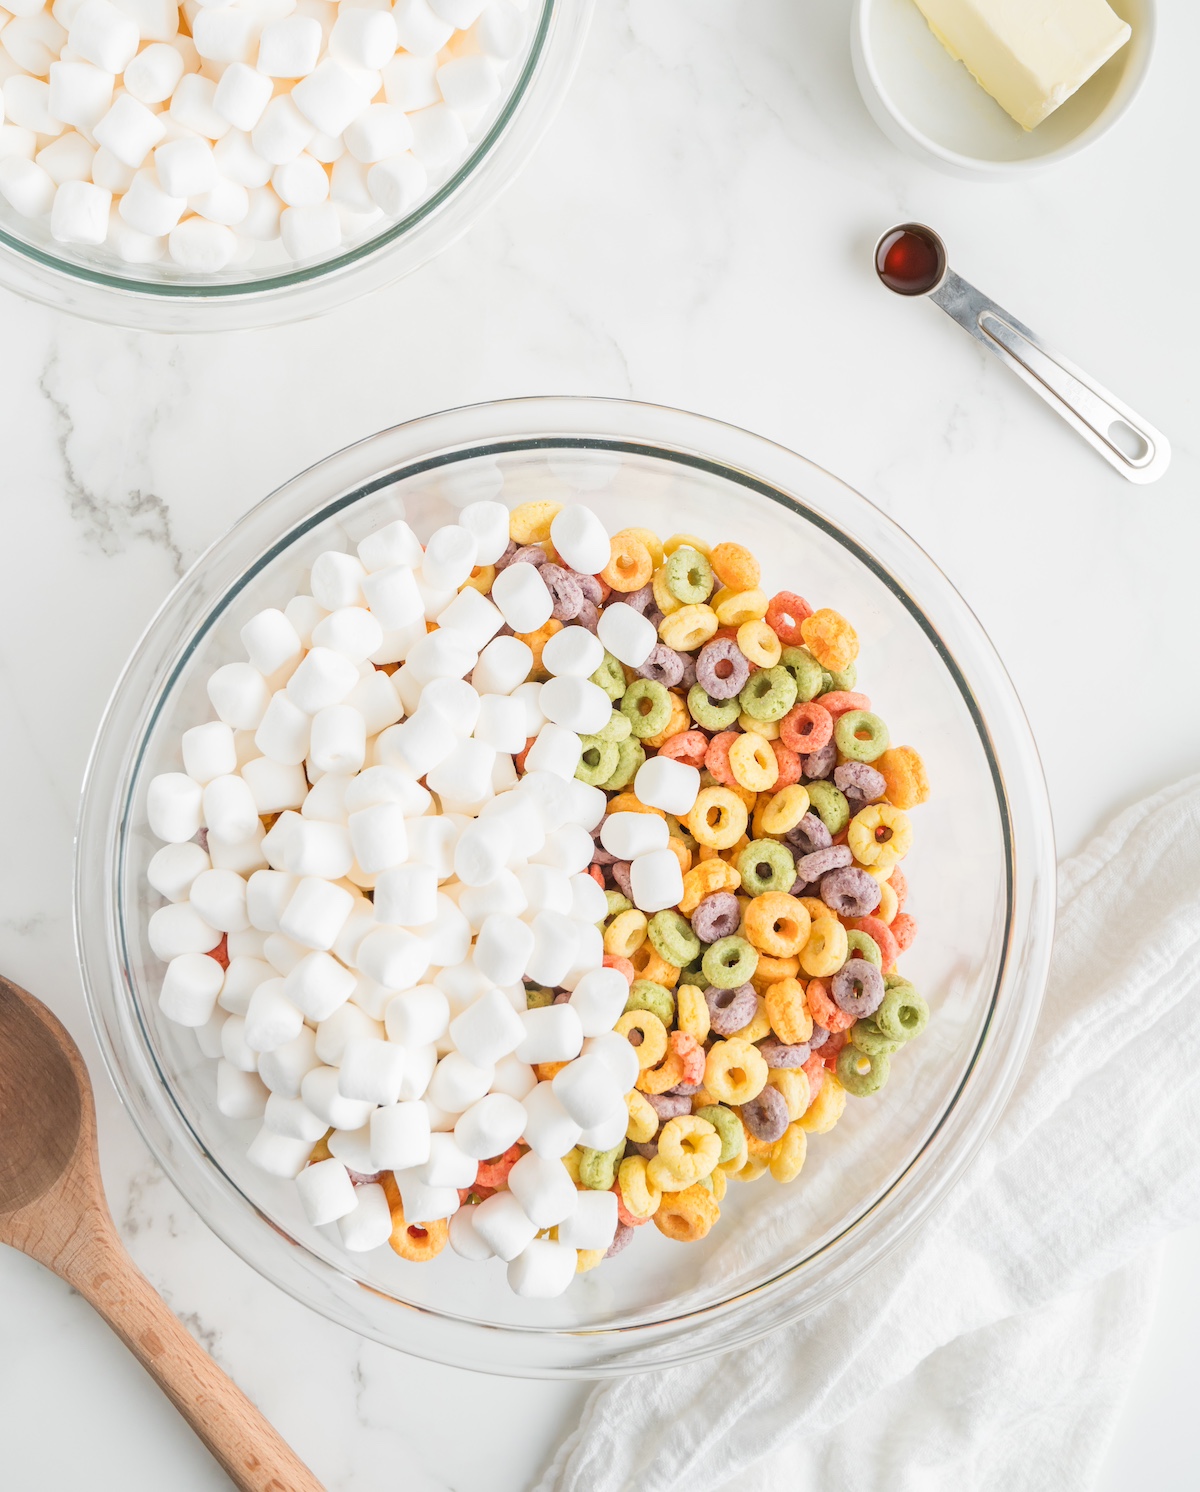 Mixing Fruit loops and marshmallows